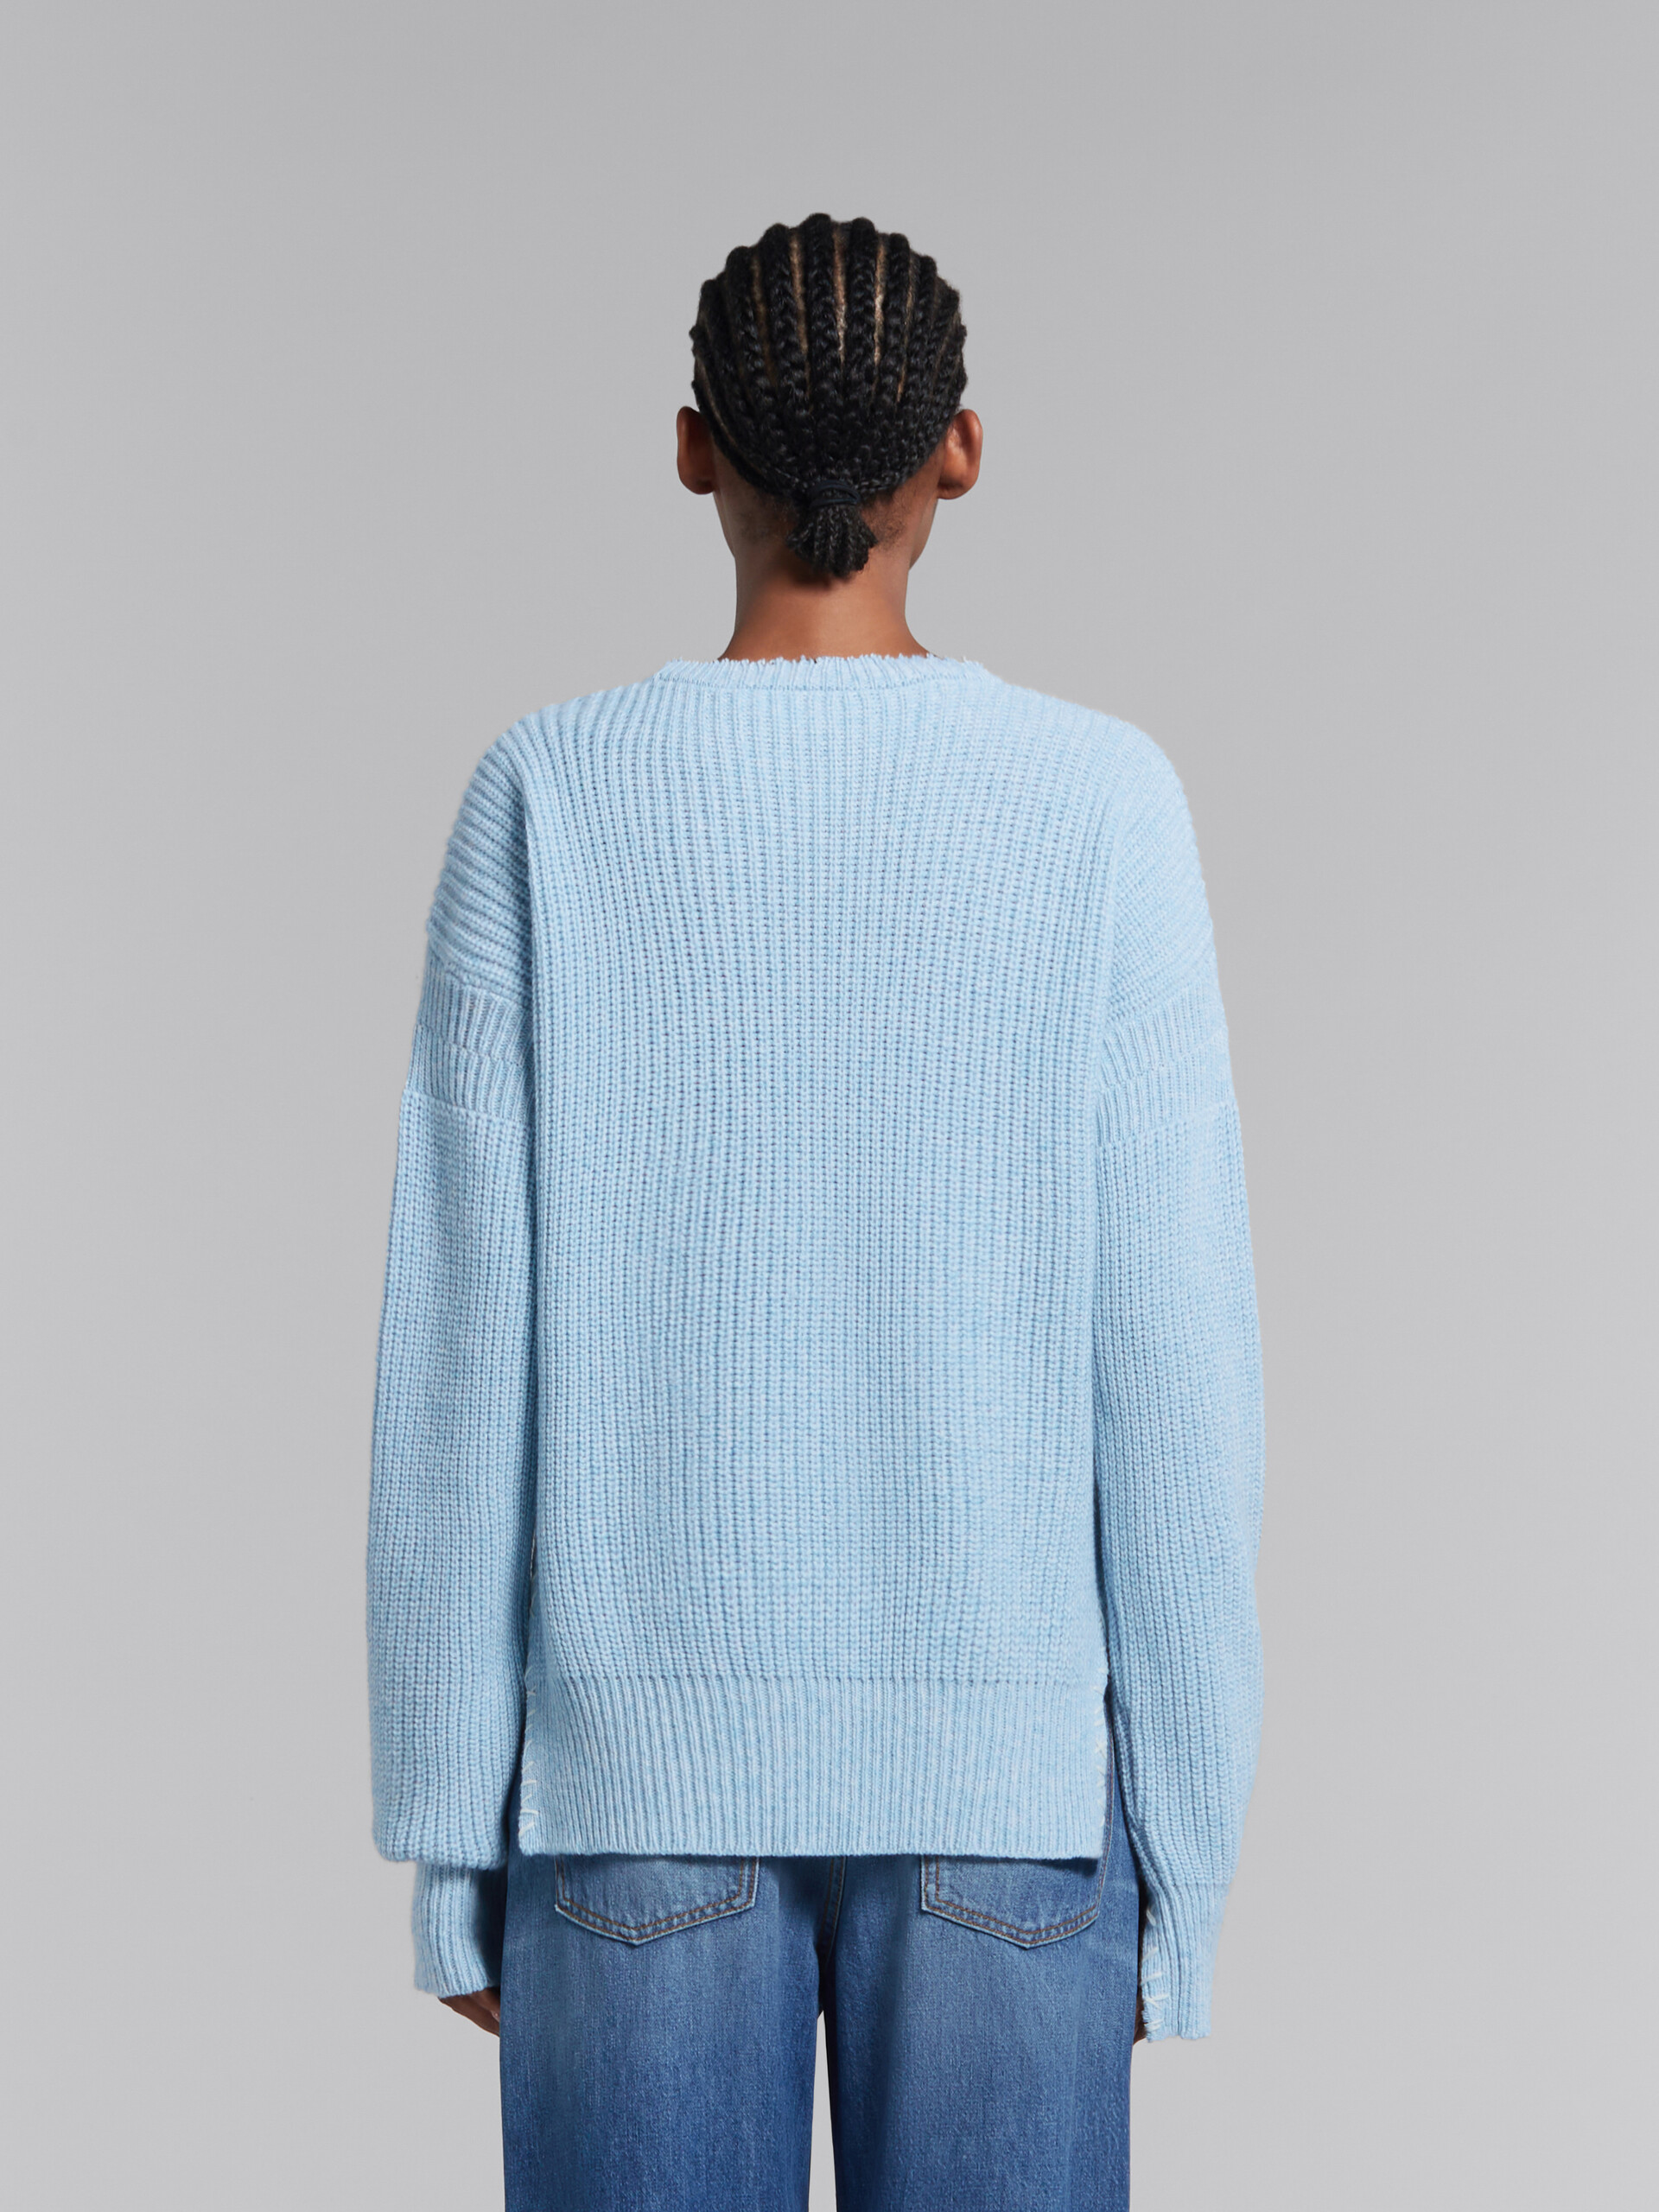 Blue mouliné jumper with mending - Pullovers - Image 3